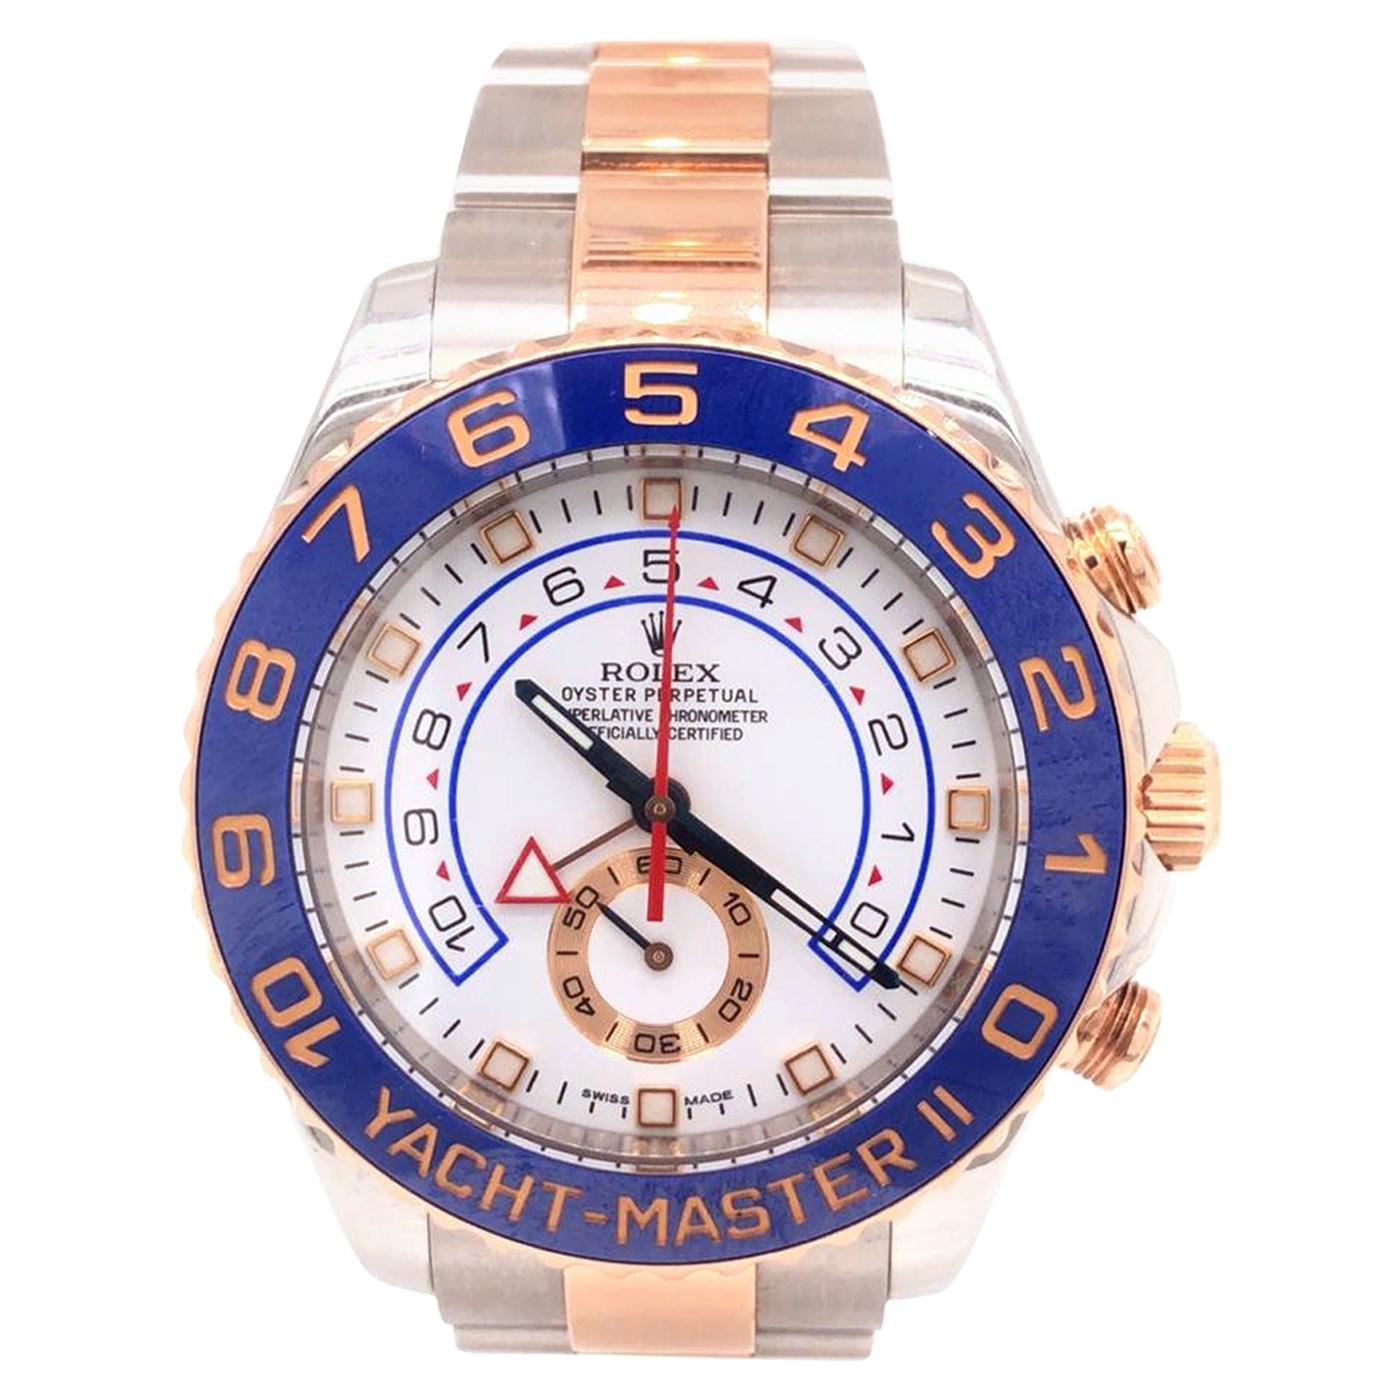 Rolex Yacht-Master II 116681 Steel and Rose Gold Automatic Men's Watch